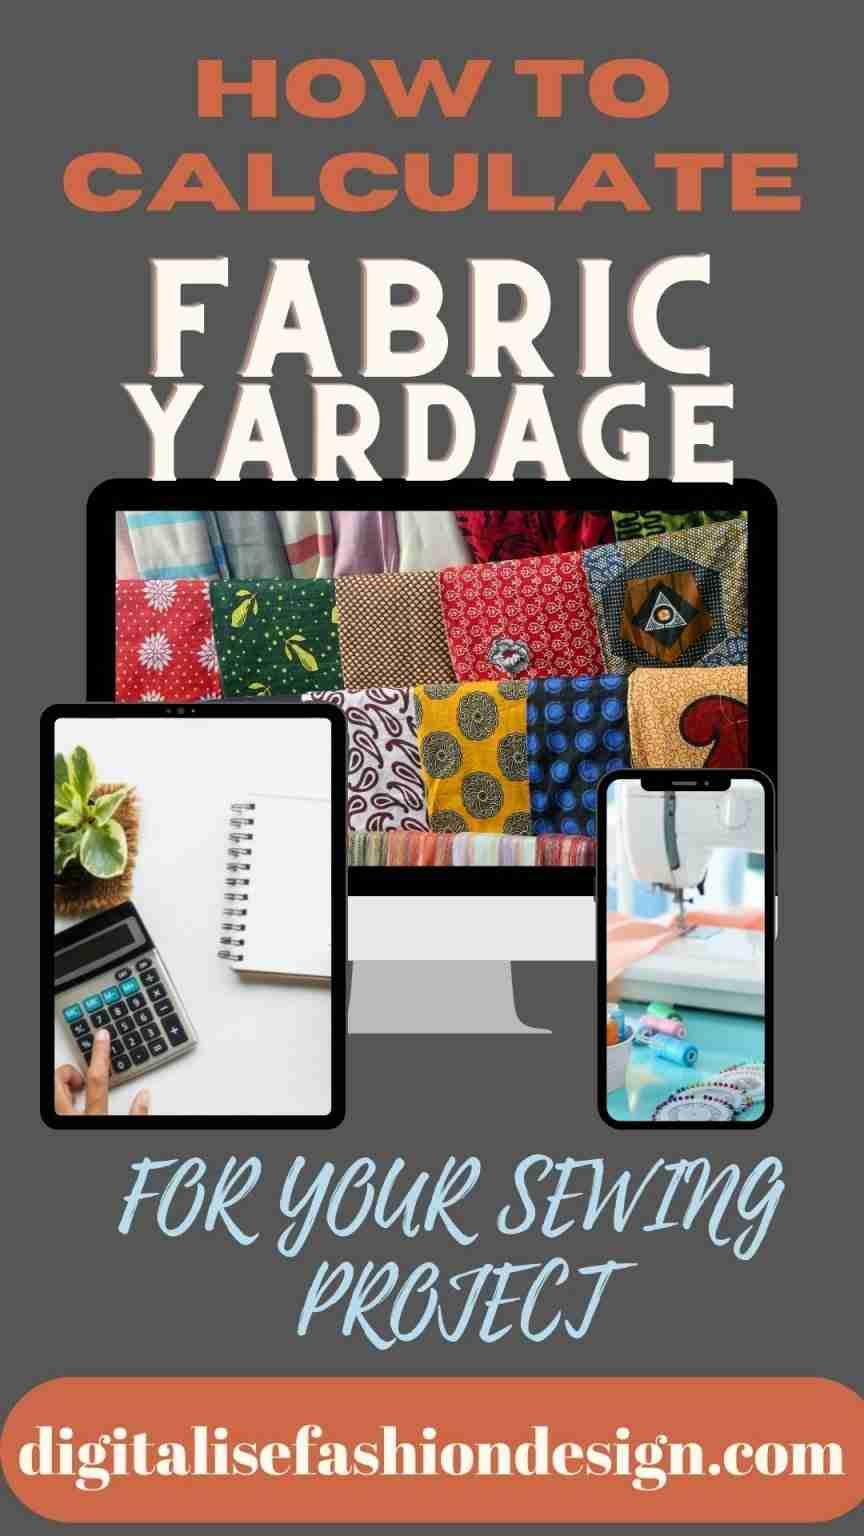 HOW TO CALCULATE FABRIC YARDAGE FOR SEWING.(FREE FABRIC CALCULATOR